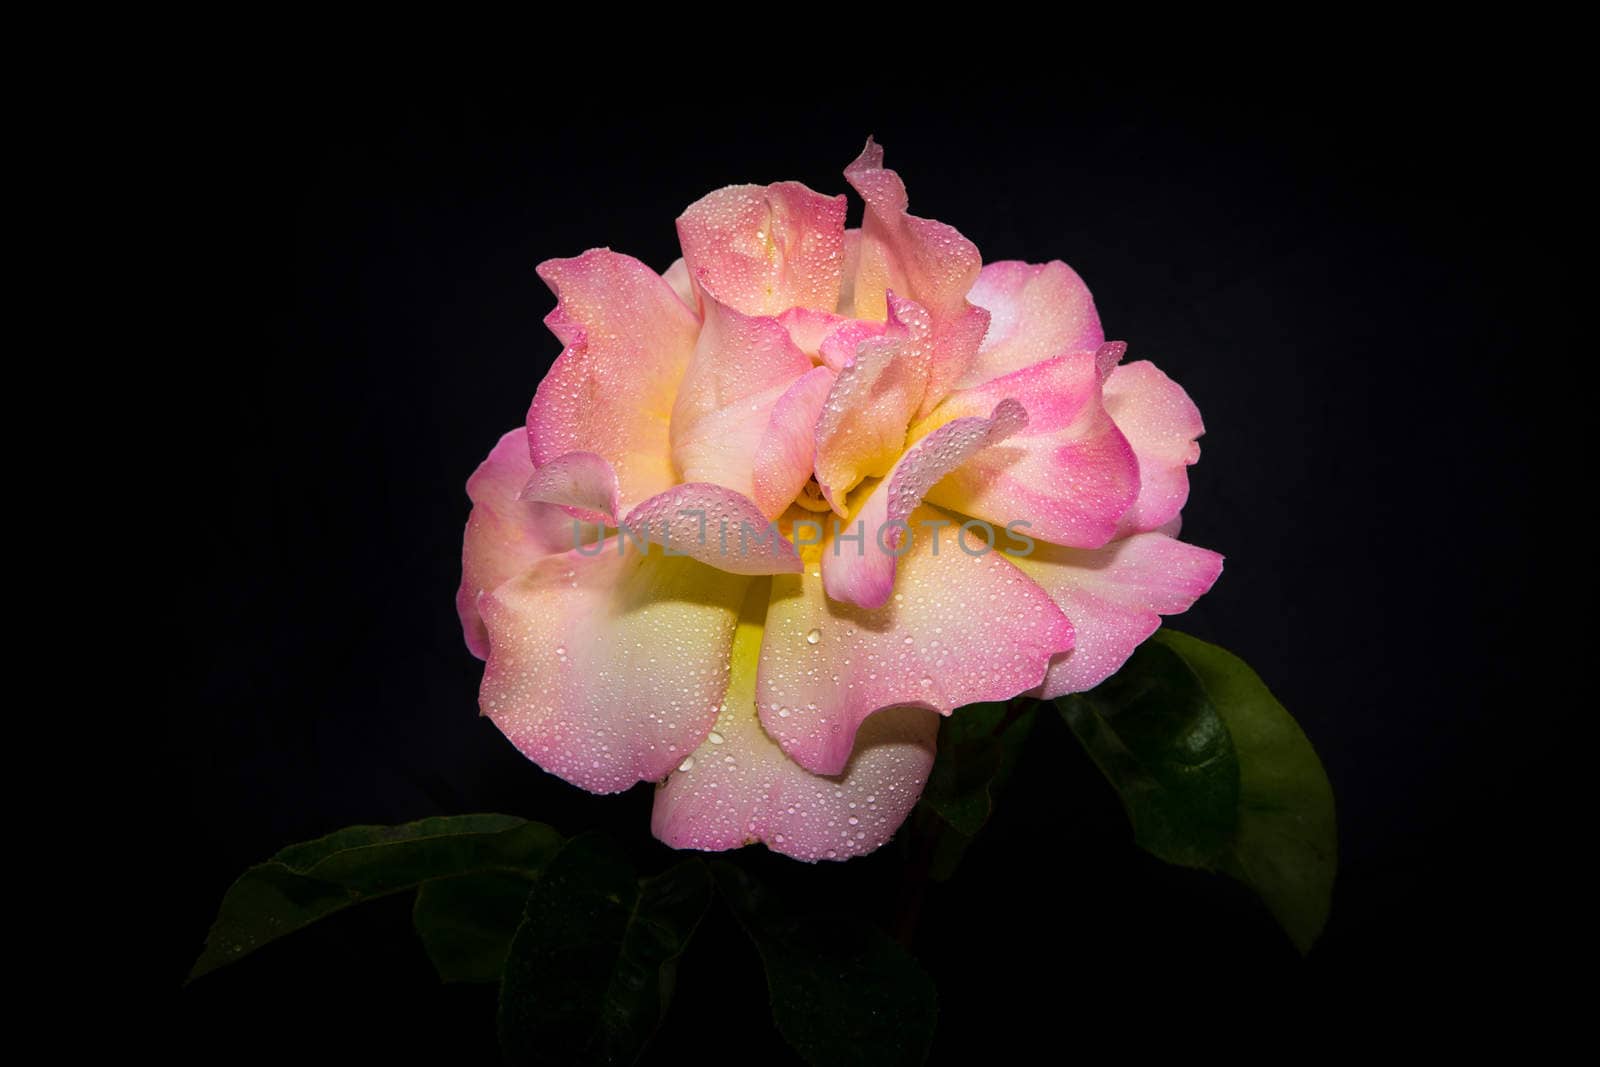 Pink Rose in Morning Dew by wolterk